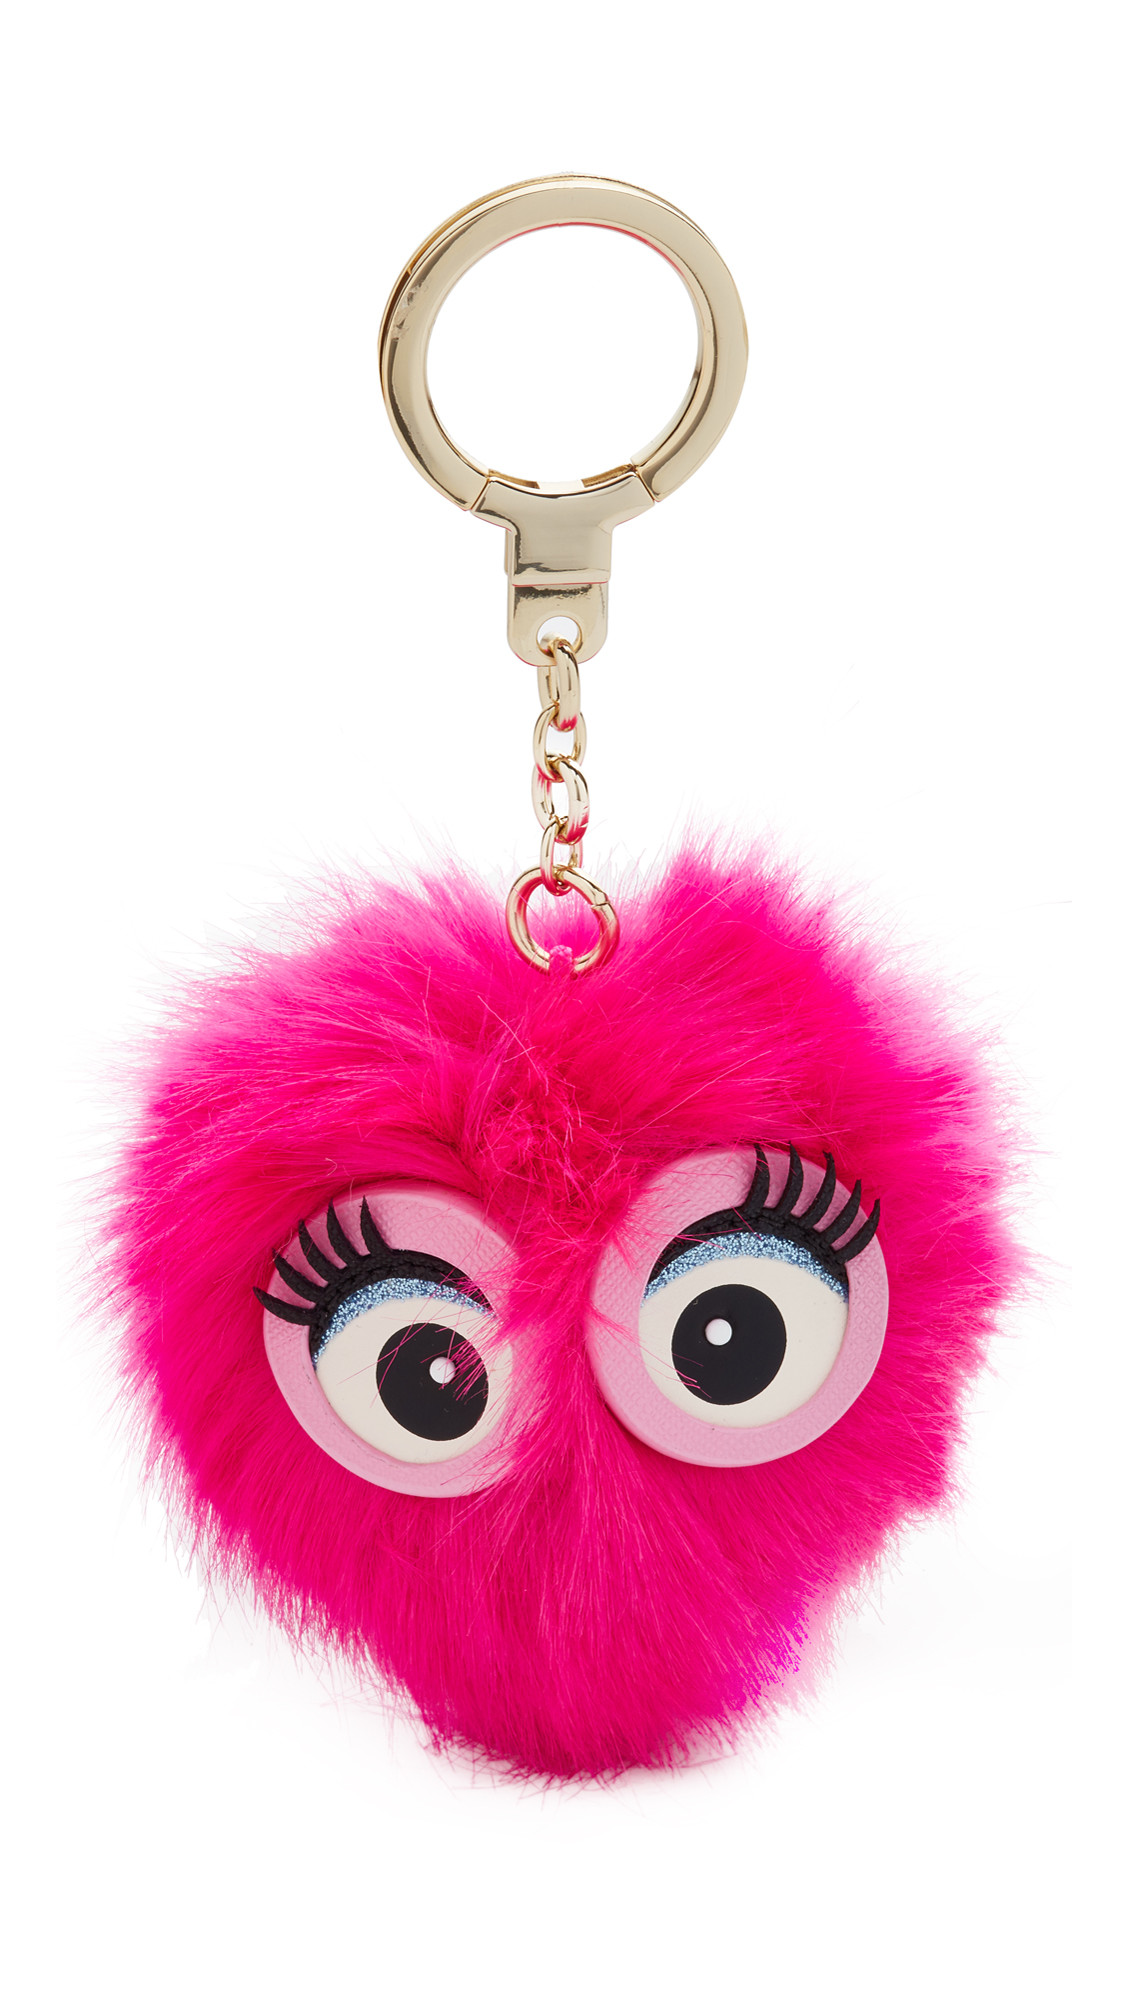 25 Stunning Kate Spade Owl Vase 2024 free download kate spade owl vase of specializing in comfortable kate spade new york accessories pertaining to kate spade new york monster pouf pig key fob pink confetti women accessories keychainskate